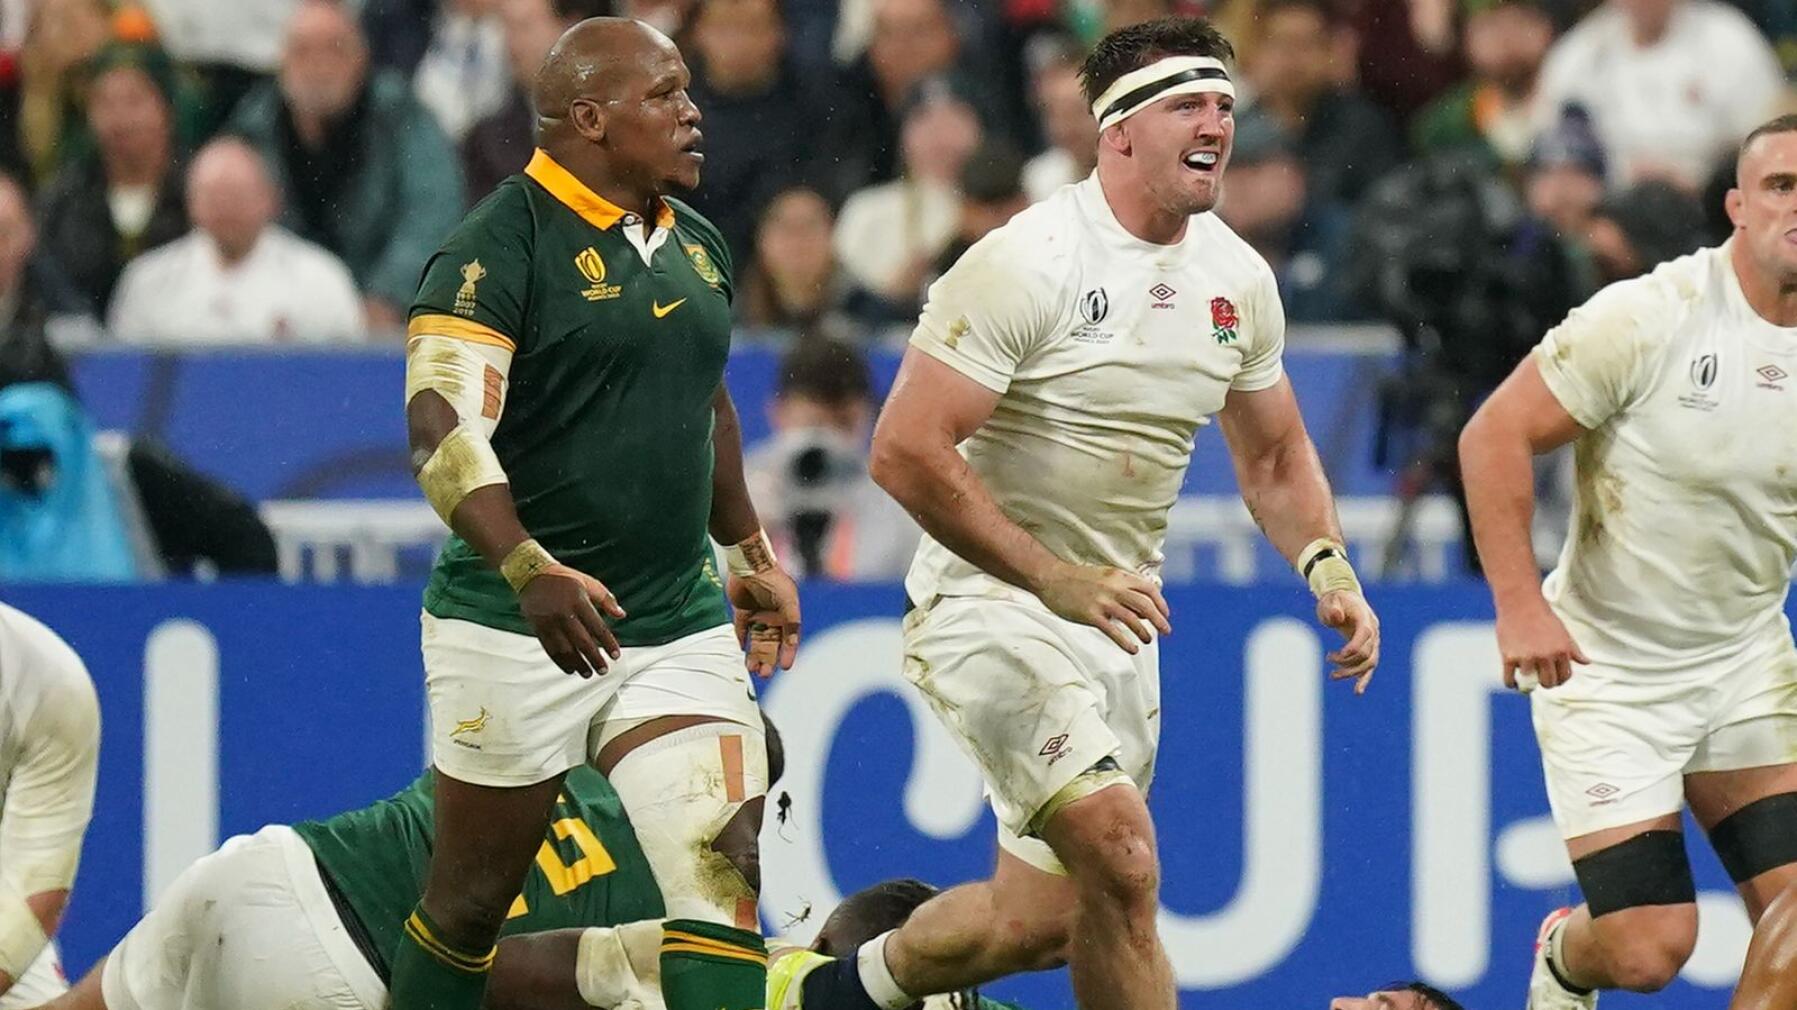 The Springboks' Bongi Mbonambi and England's Tom Curry during the Rugby World Cup semi final.